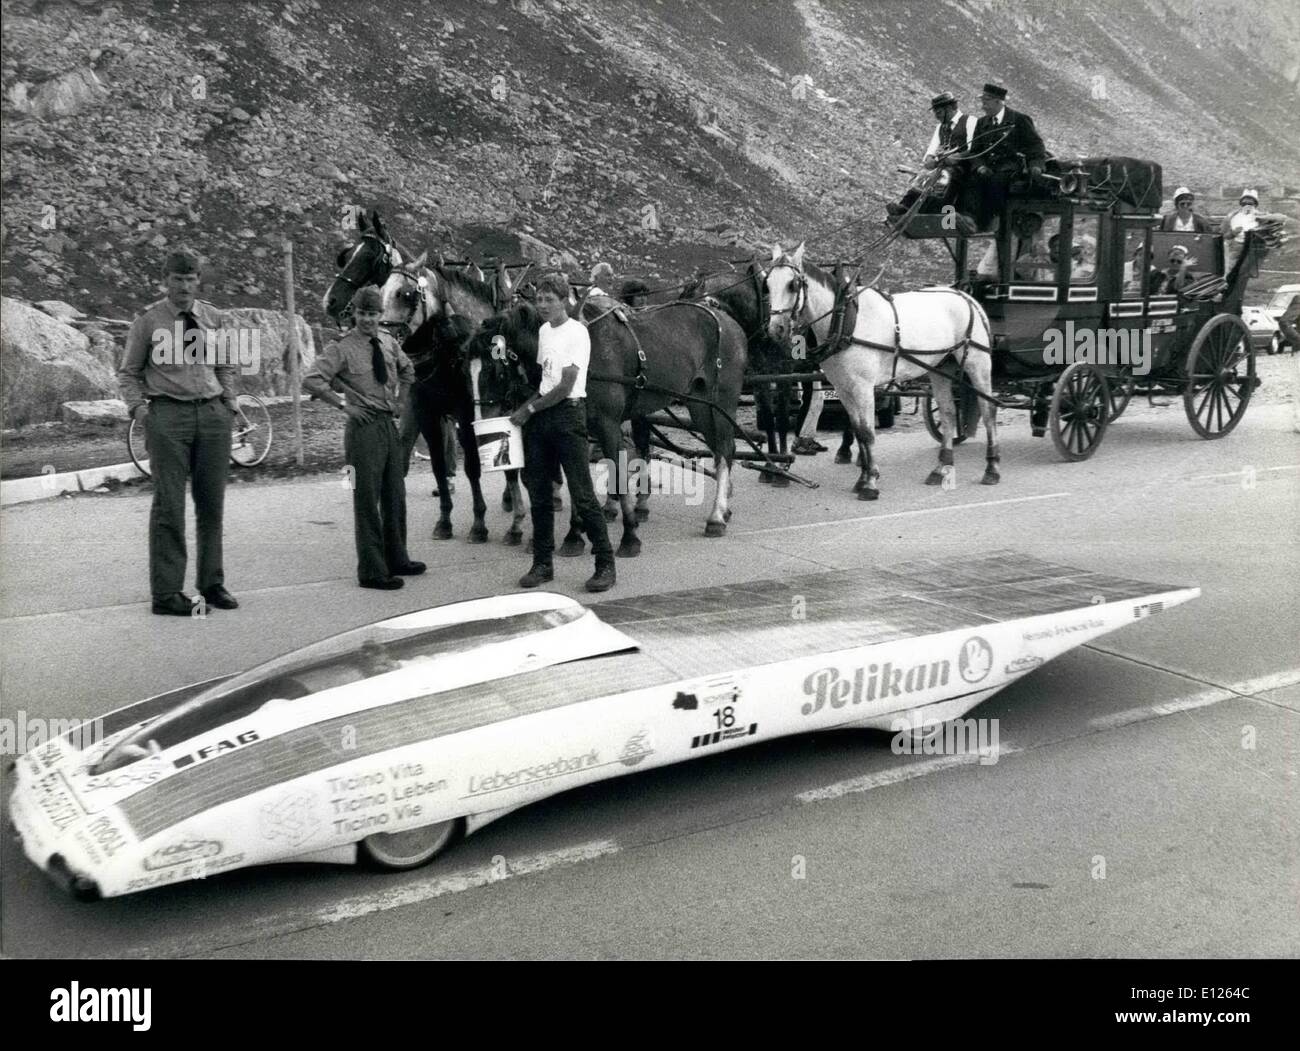 Jun. 06, 1989 - Strange encounter on the Gotthard pass While this nostalgic stage-coach is on its way to bring tourists to the sunny Tessin on June27th, it meets a very different kind of vehicles right on the Gotthard Pass: It's the Musenalp-Trykowski- Mobile, leader in this years Tour De Sol, which crosses easily and with respectable speed this alpine pass. Stock Photo